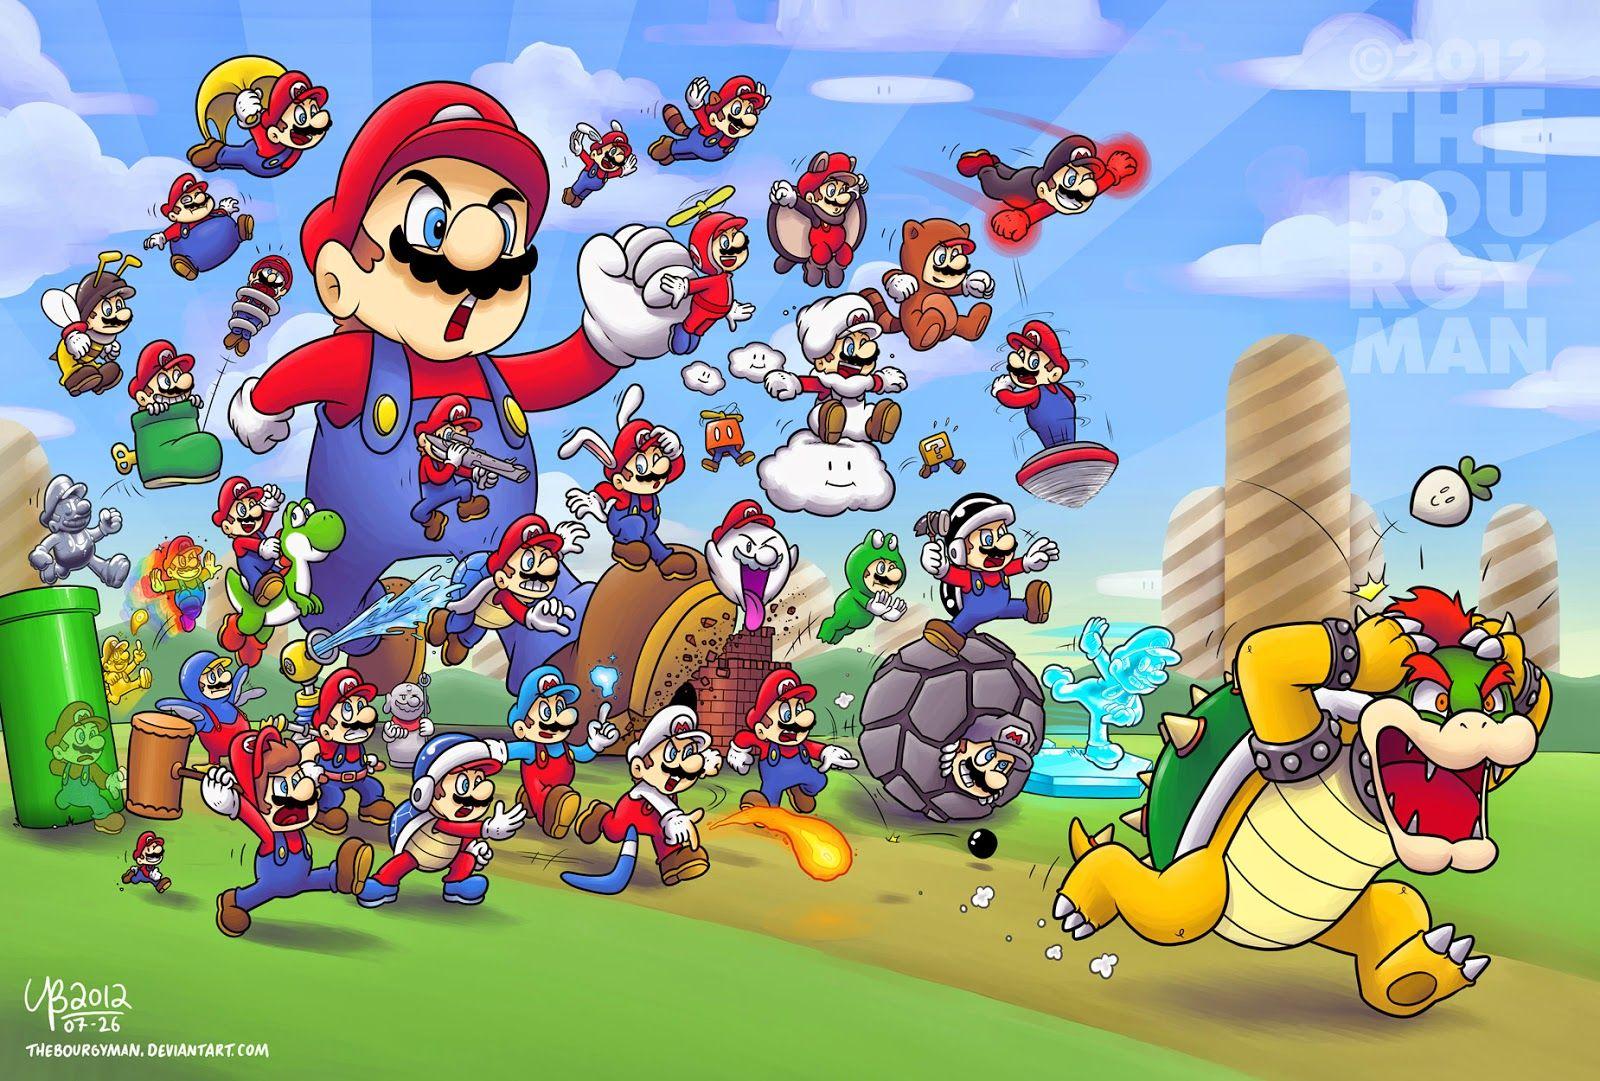 New Super Mario Bros 2 Wallpapers Top Free New Super Mario Bros 2 Backgrounds Wallpaperaccess